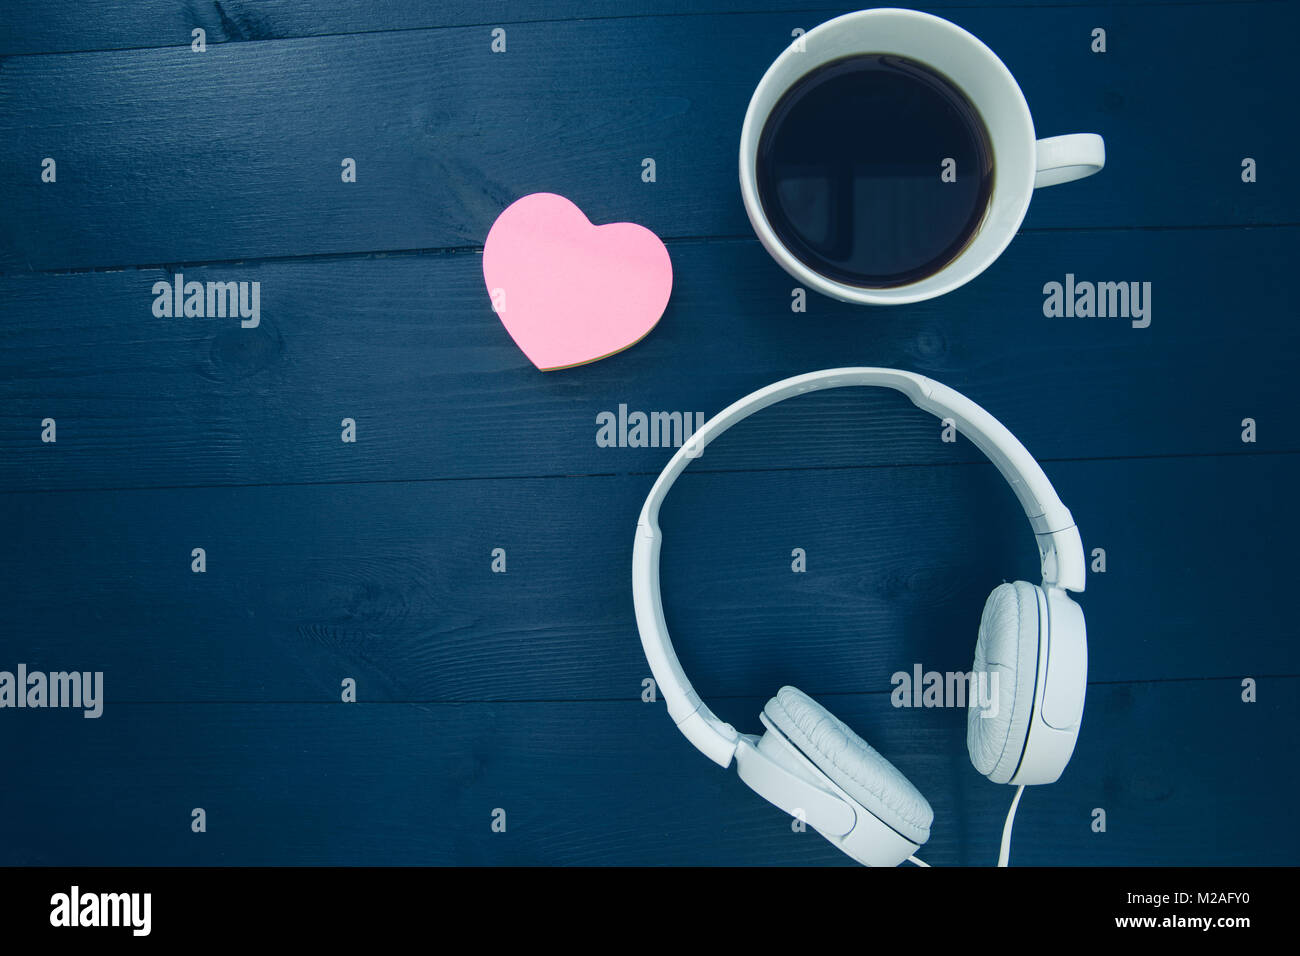 Love Music Concept With Pink Love Heart Shape And White Music Stock Photo Alamy